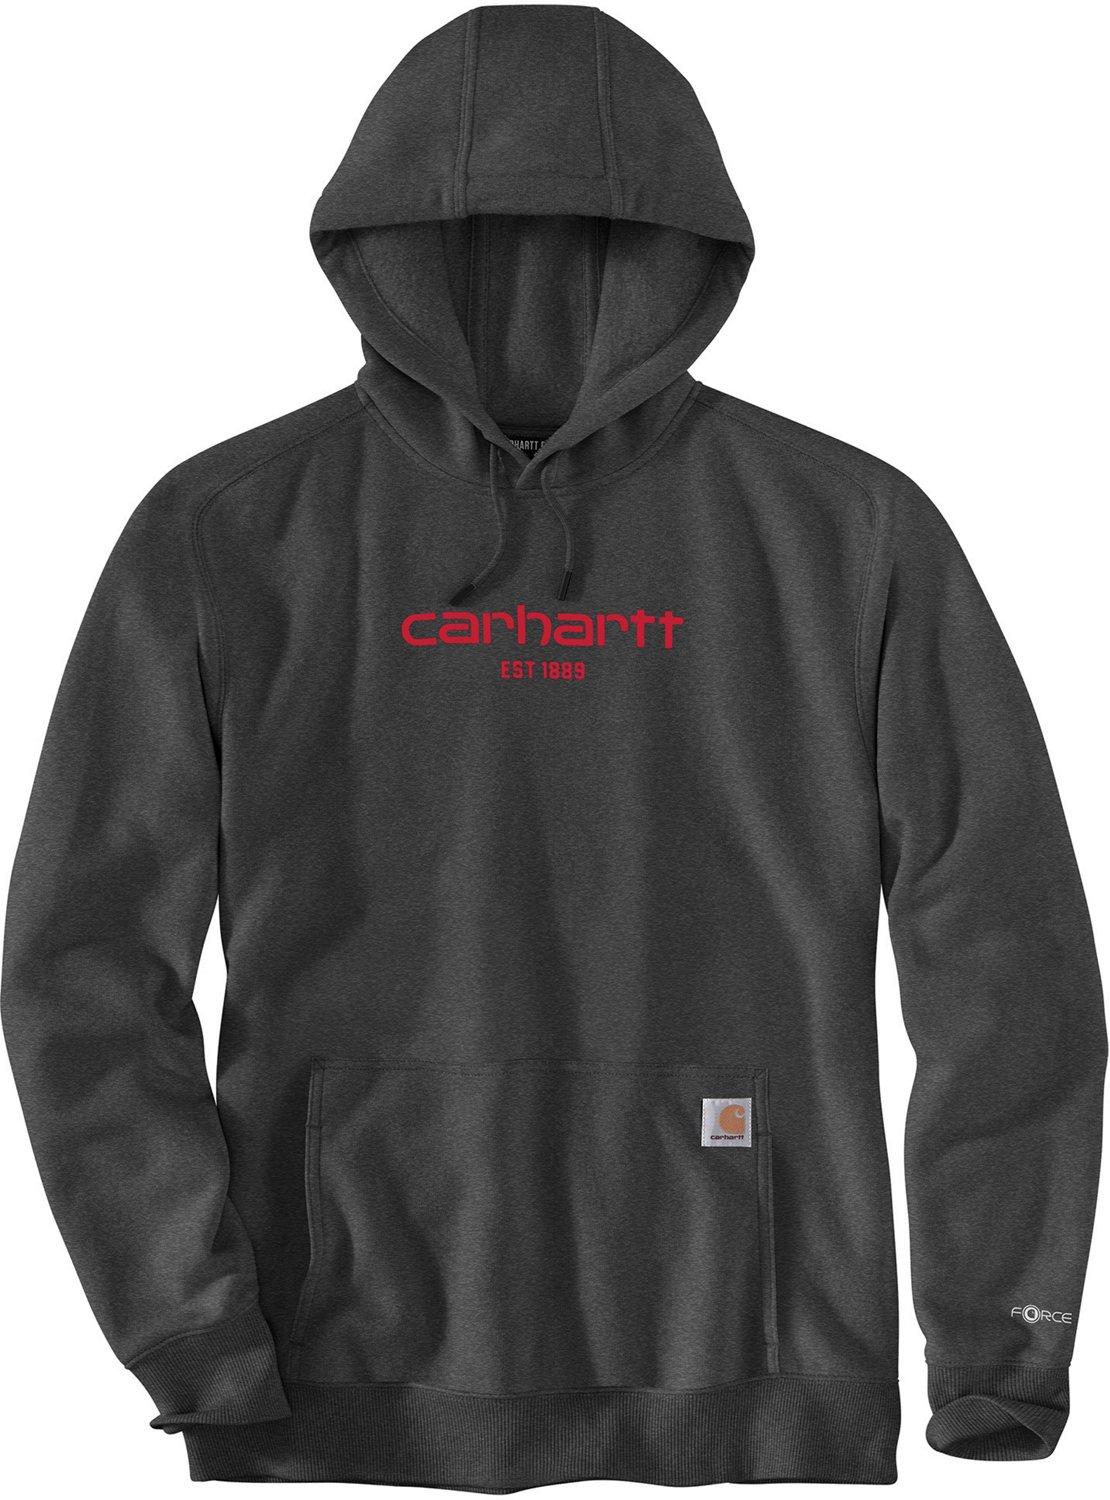 Carhartt Men's Relaxed Sweatshirt | Free Shipping at Academy